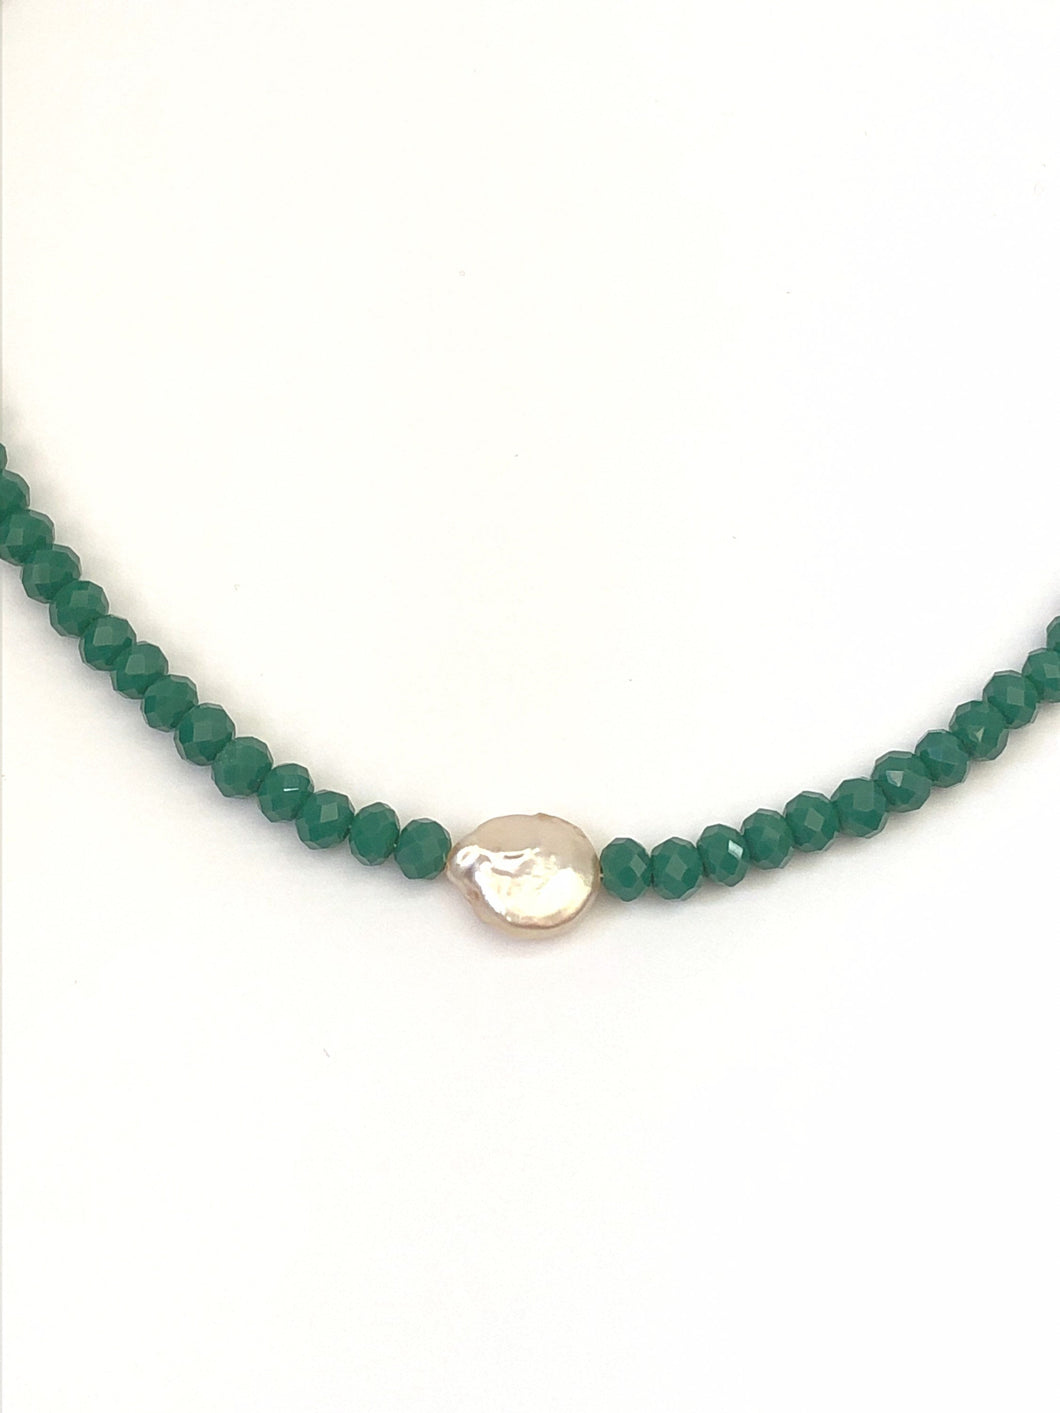 Sand Dollar Pearl Choker Necklace With Emerald Green Beads